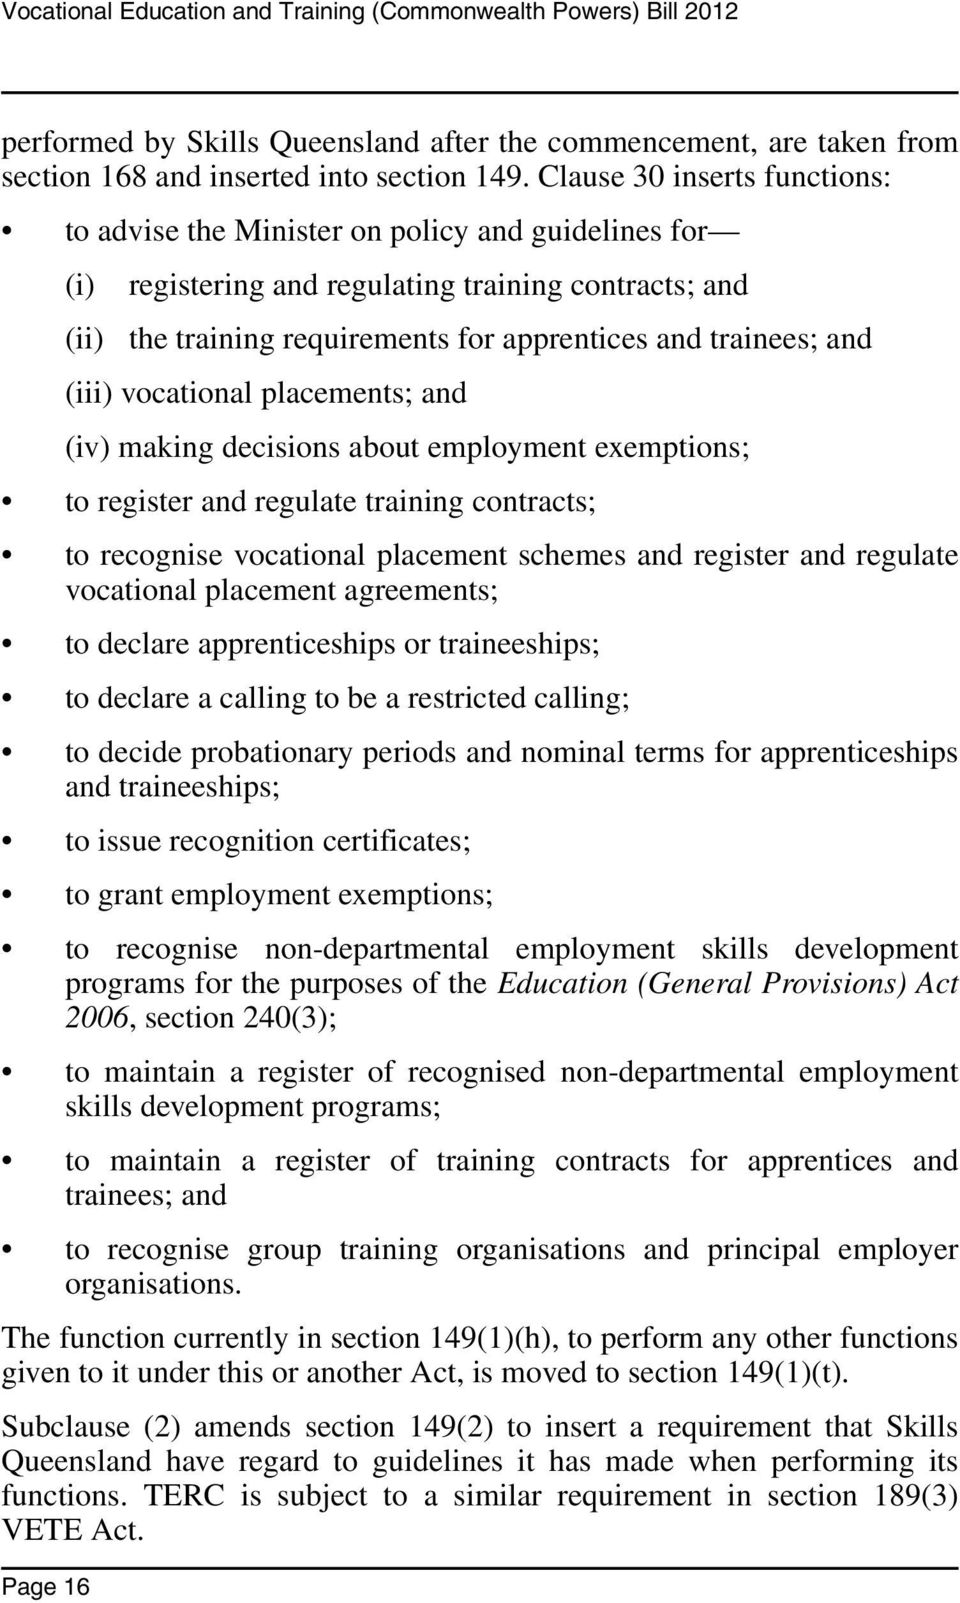 trainees; and (iii) vocational placements; and (iv) making decisions about employment exemptions; to register and regulate training contracts; to recognise vocational placement schemes and register